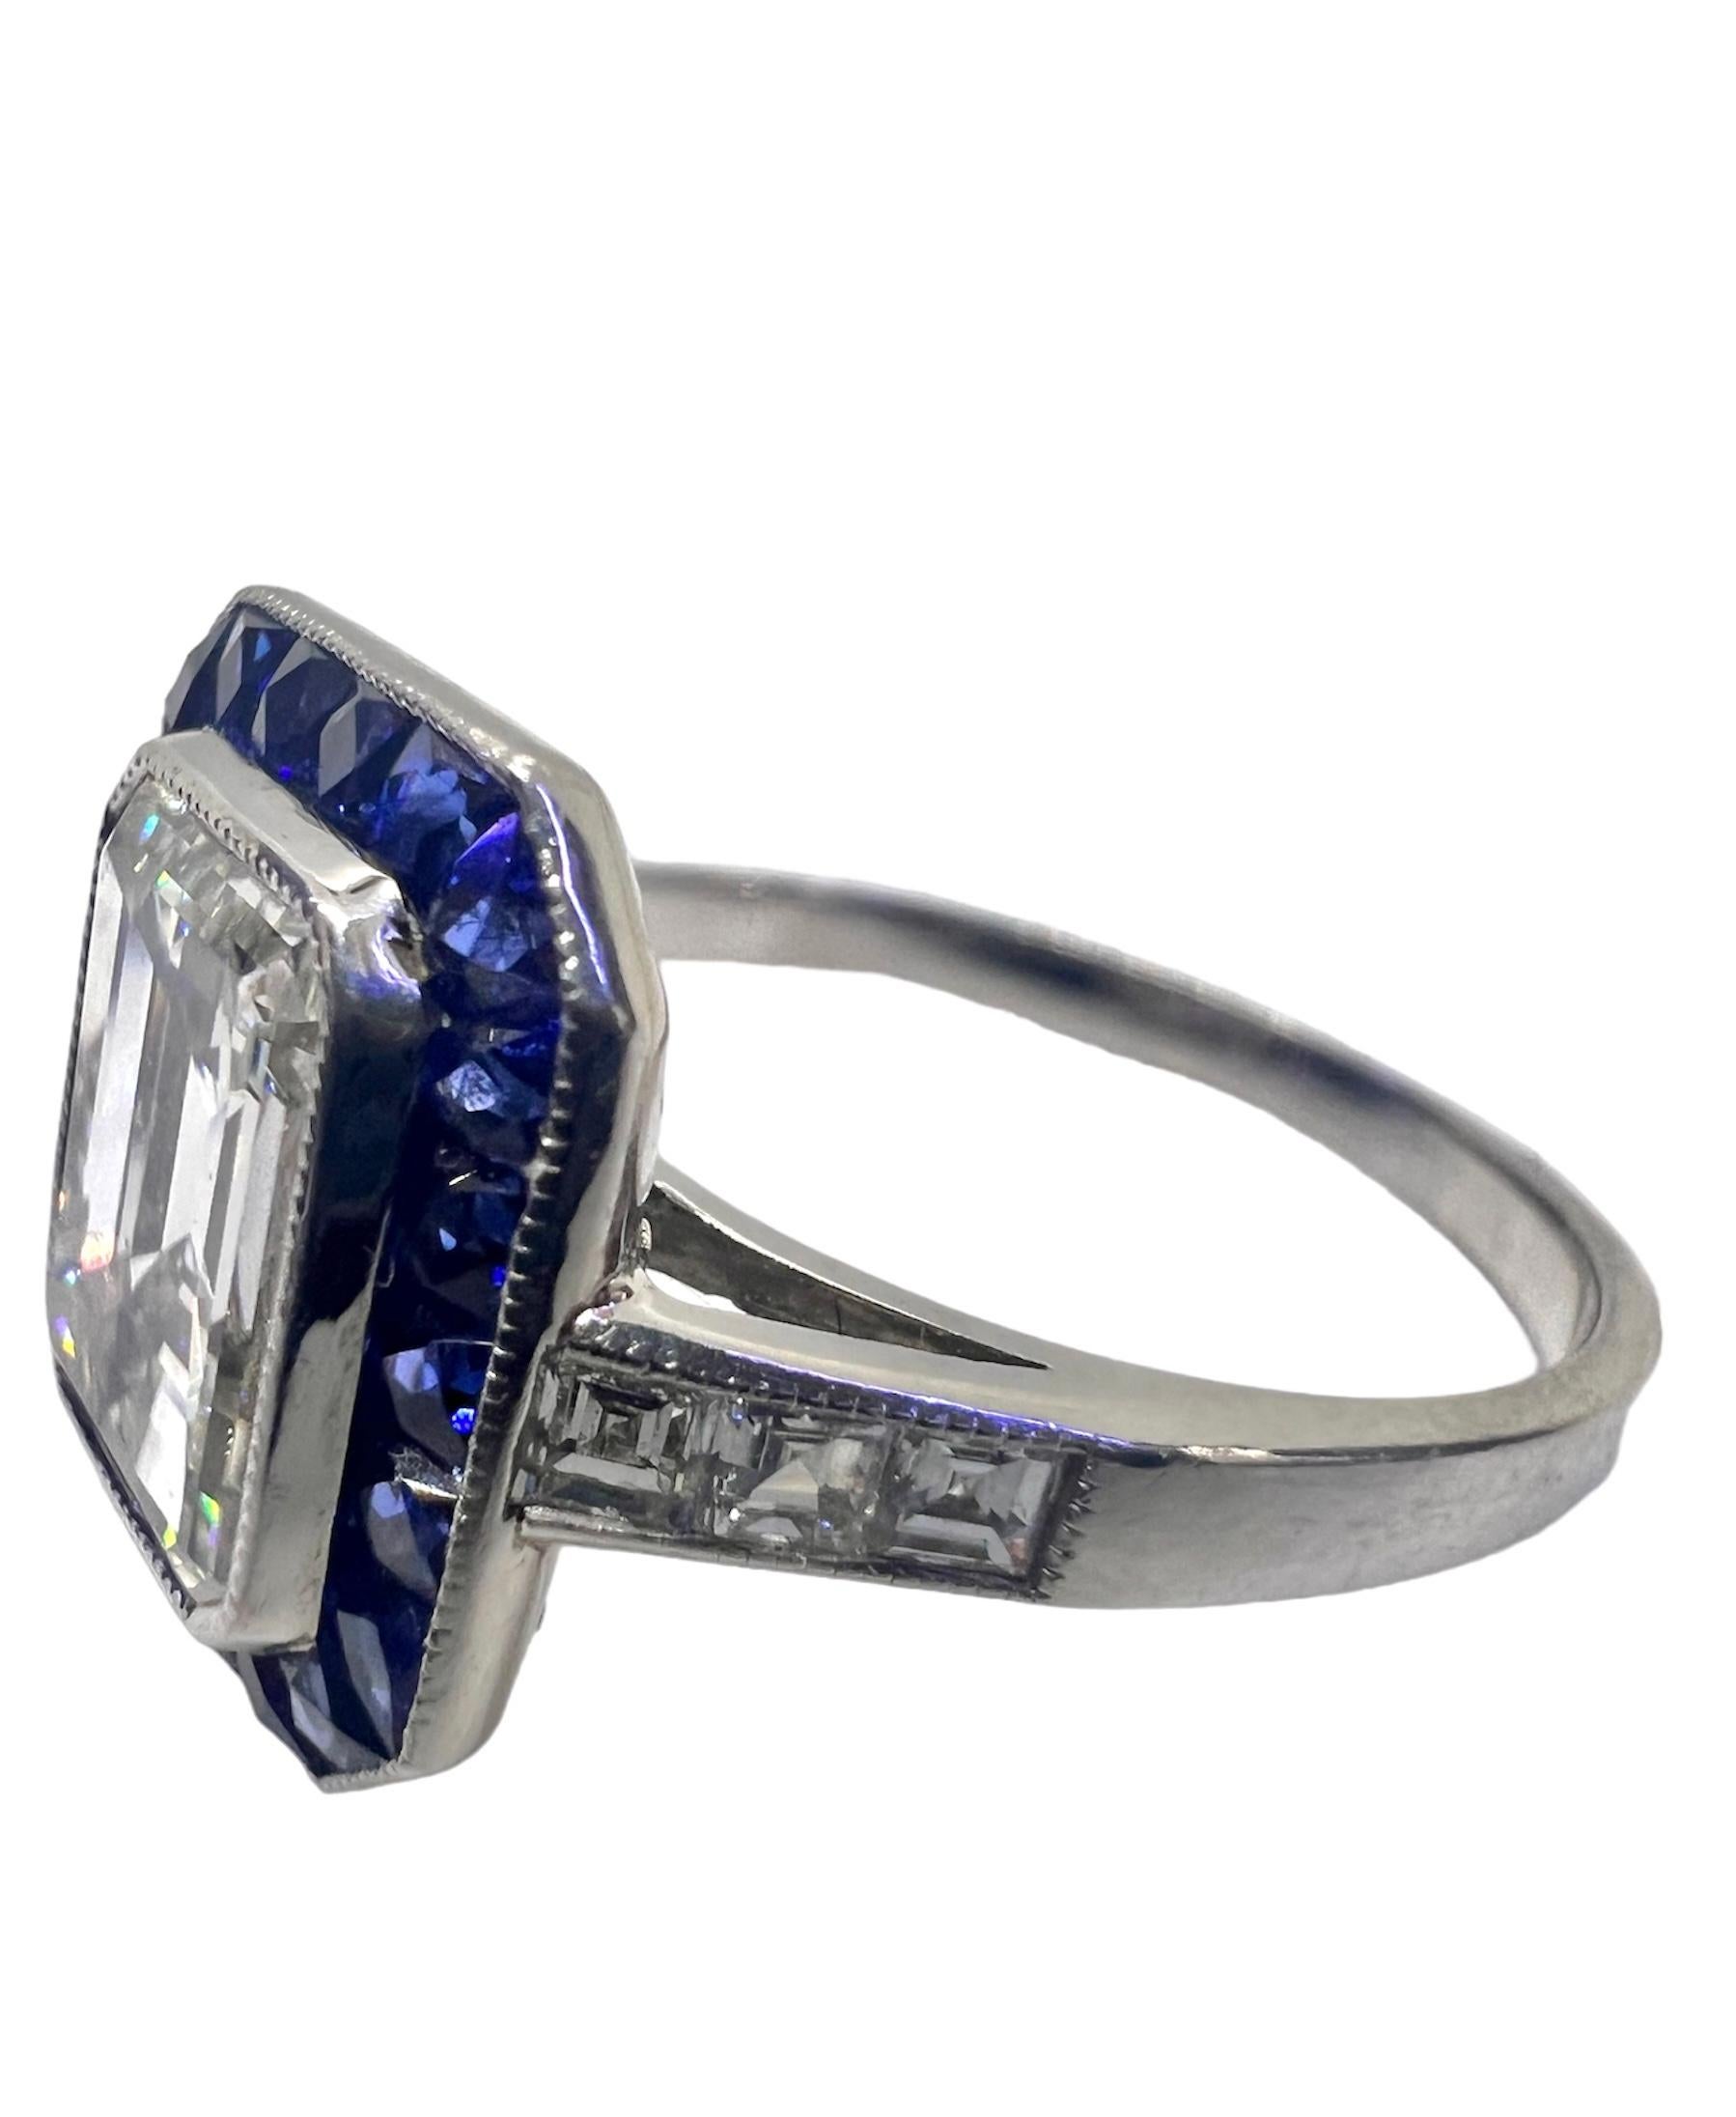 Sophia D. 2.03 Carat Emerald Cut Diamond and Sapphire Art Deco Platinum Ring In New Condition For Sale In New York, NY